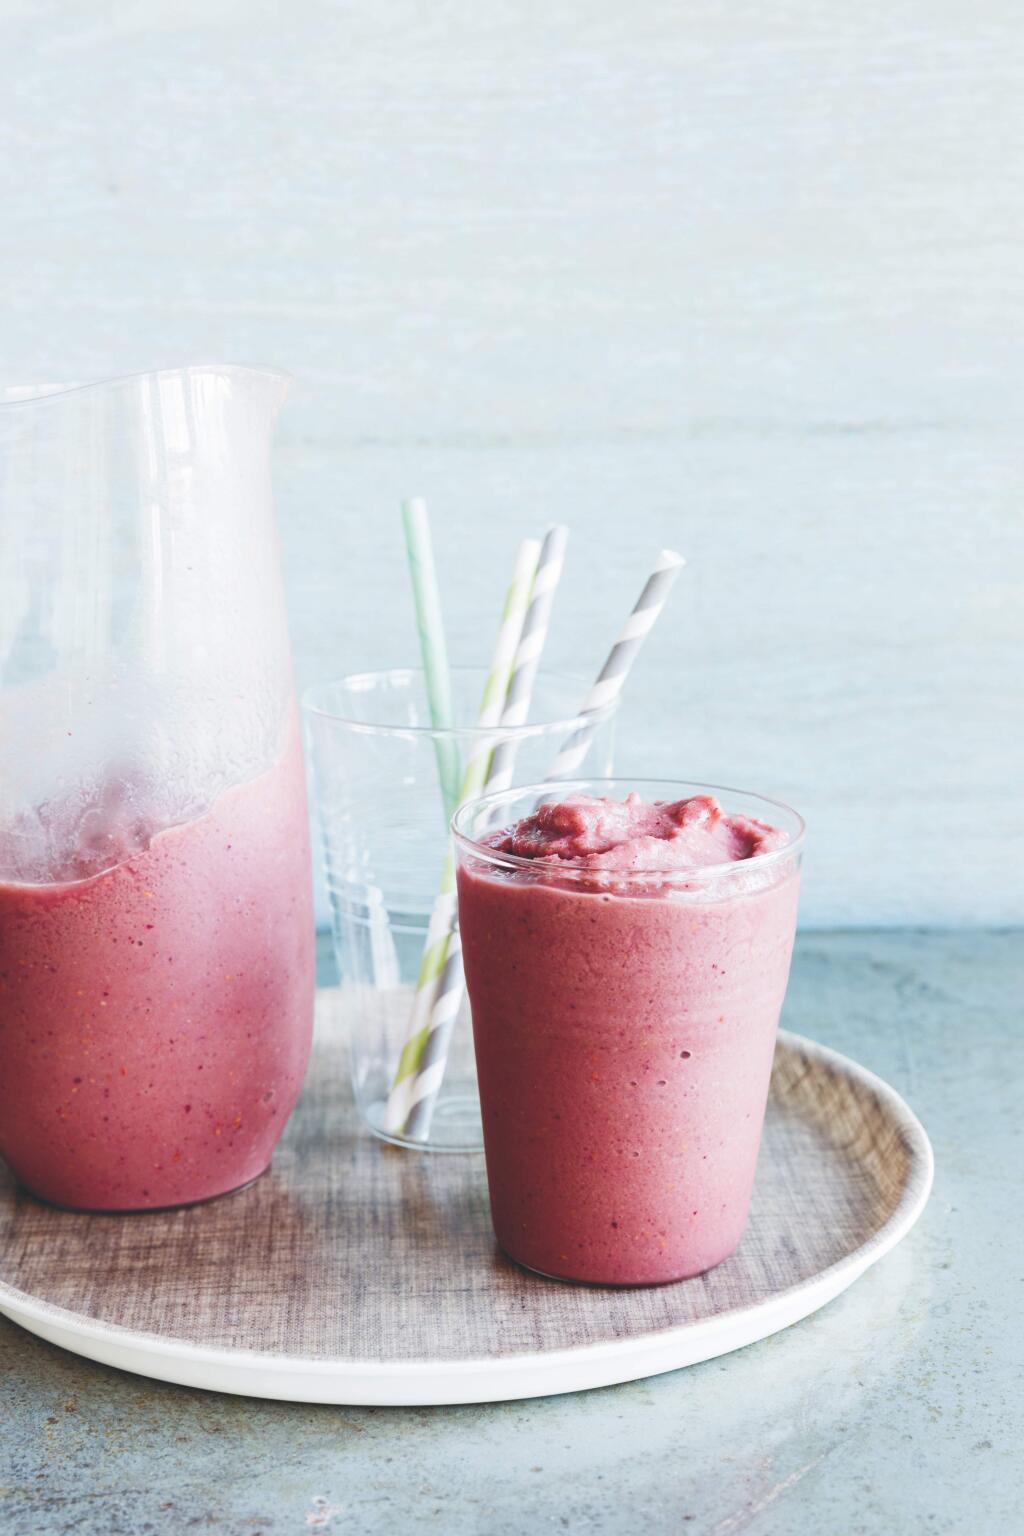 Acai and Mixed Berry Smoothie from 'The Anti-Inflammation Cookbook' by Amanda Haas. (ERIN KUNKEL)